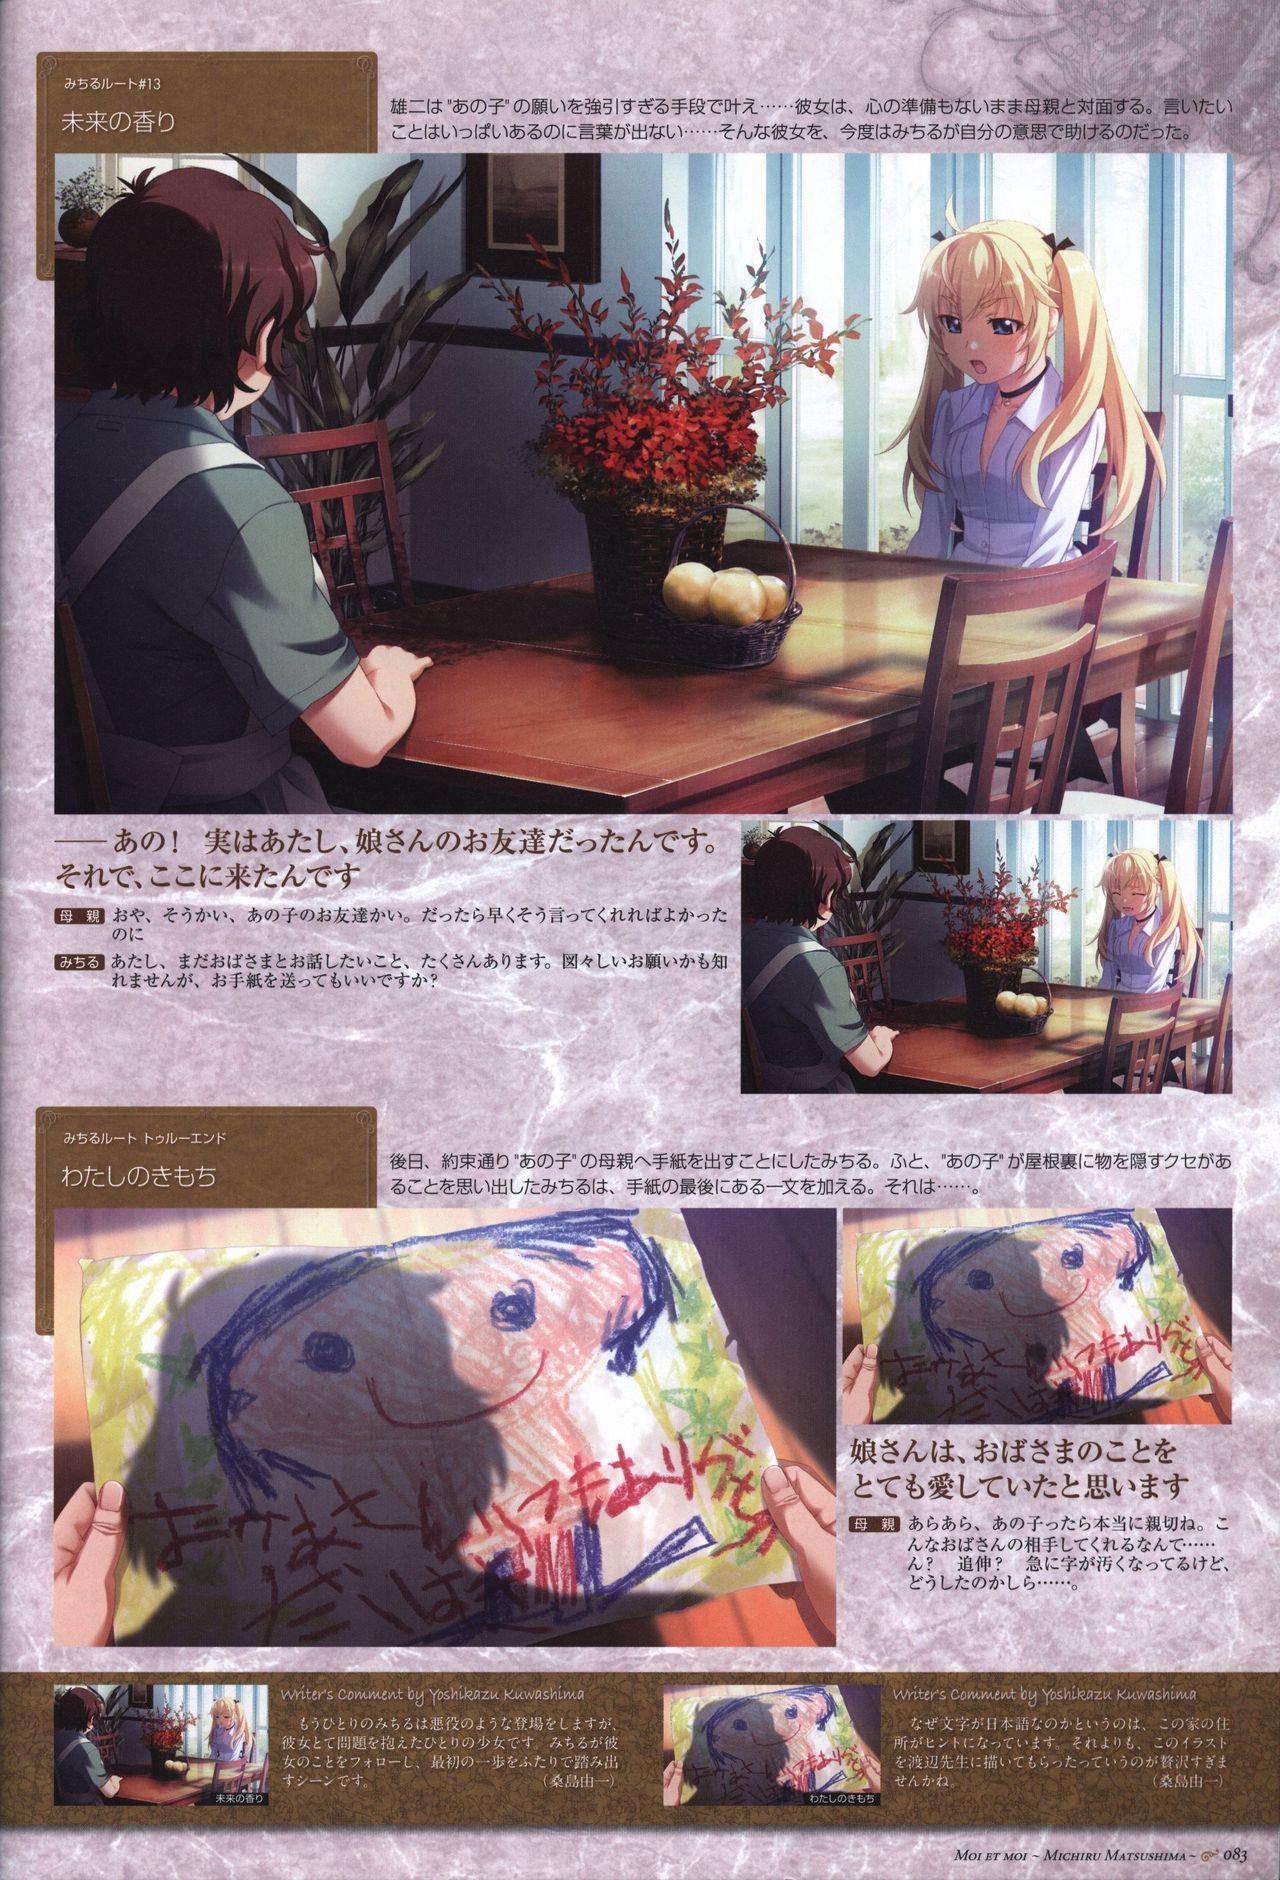 The Fruit of Grisaia Visual FanBook 83